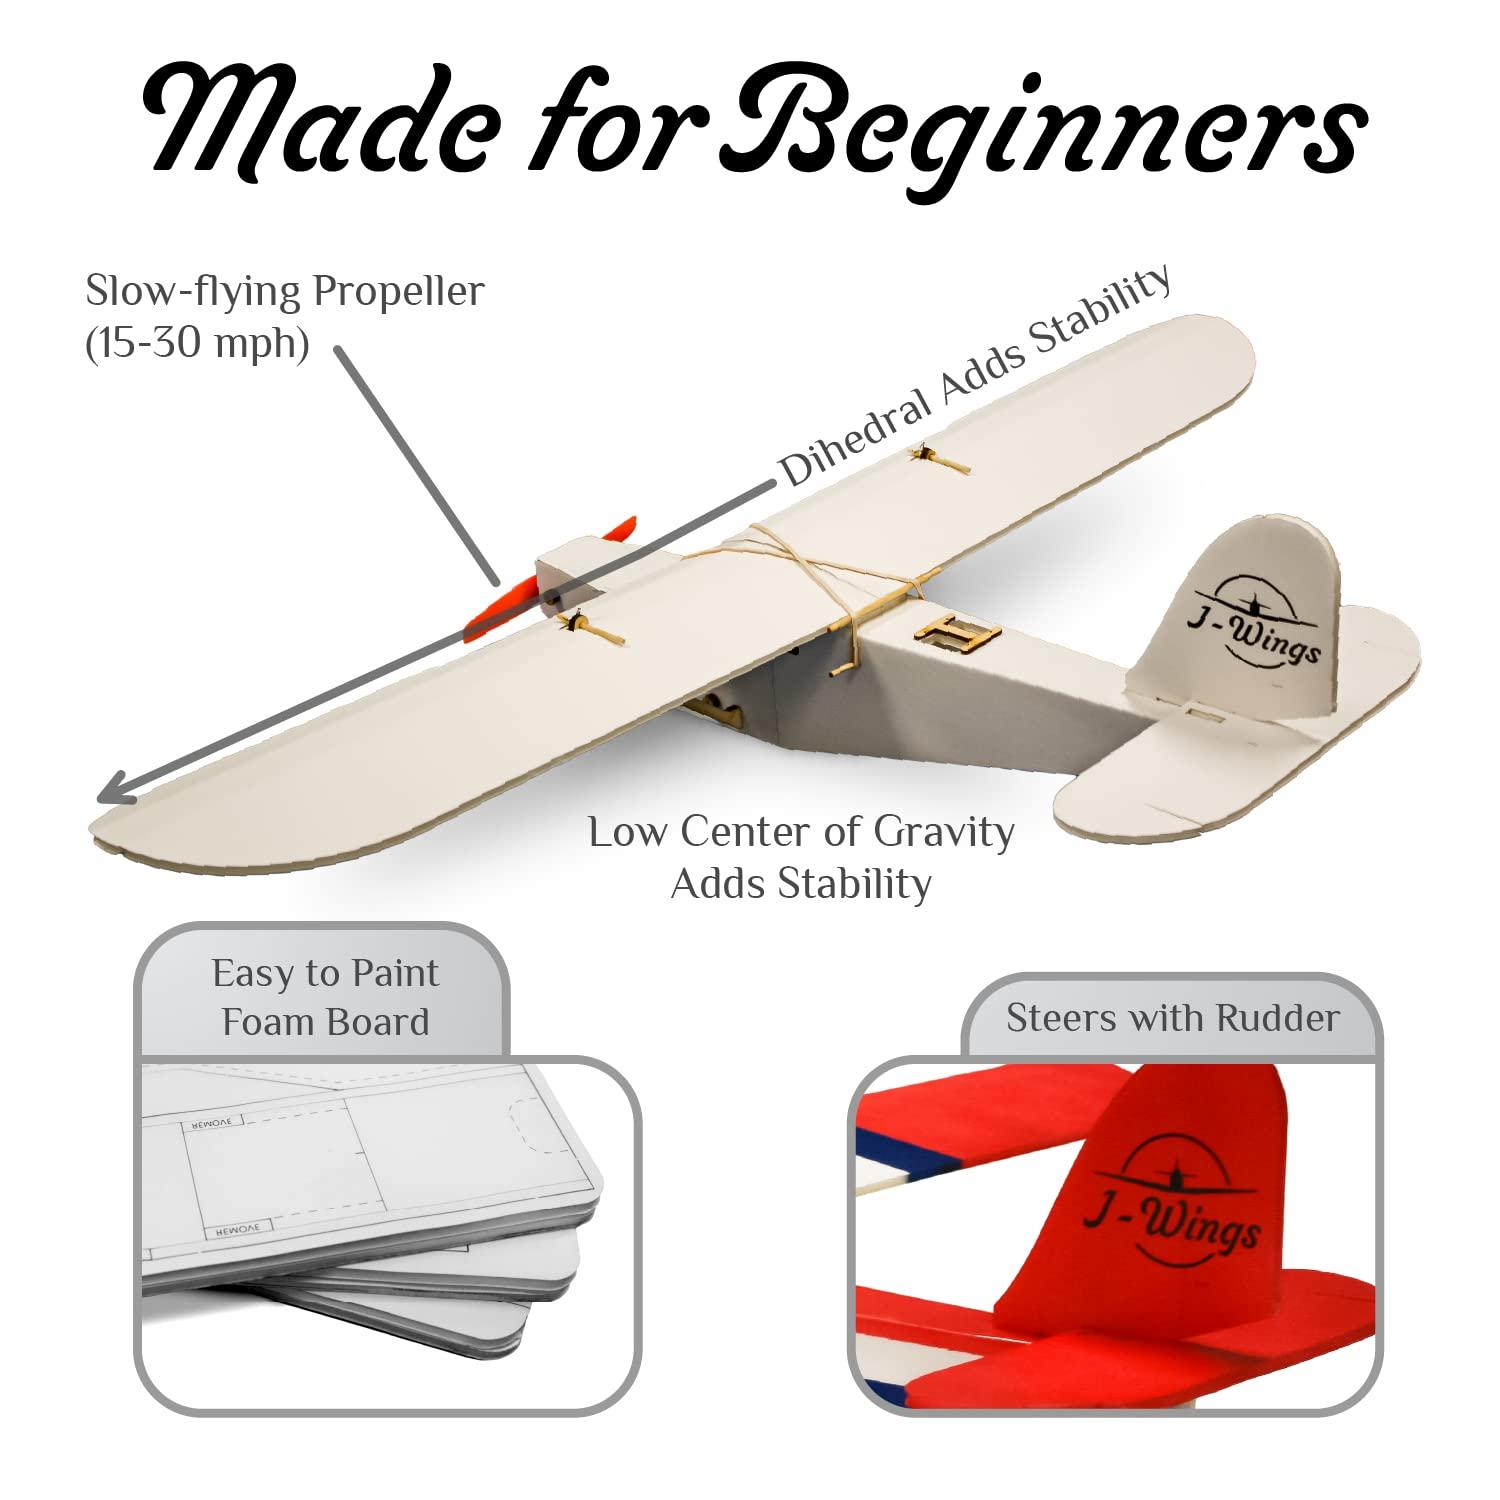 Foam Rc Jet: Essential Tips for Foam RC Jet Building and Flying